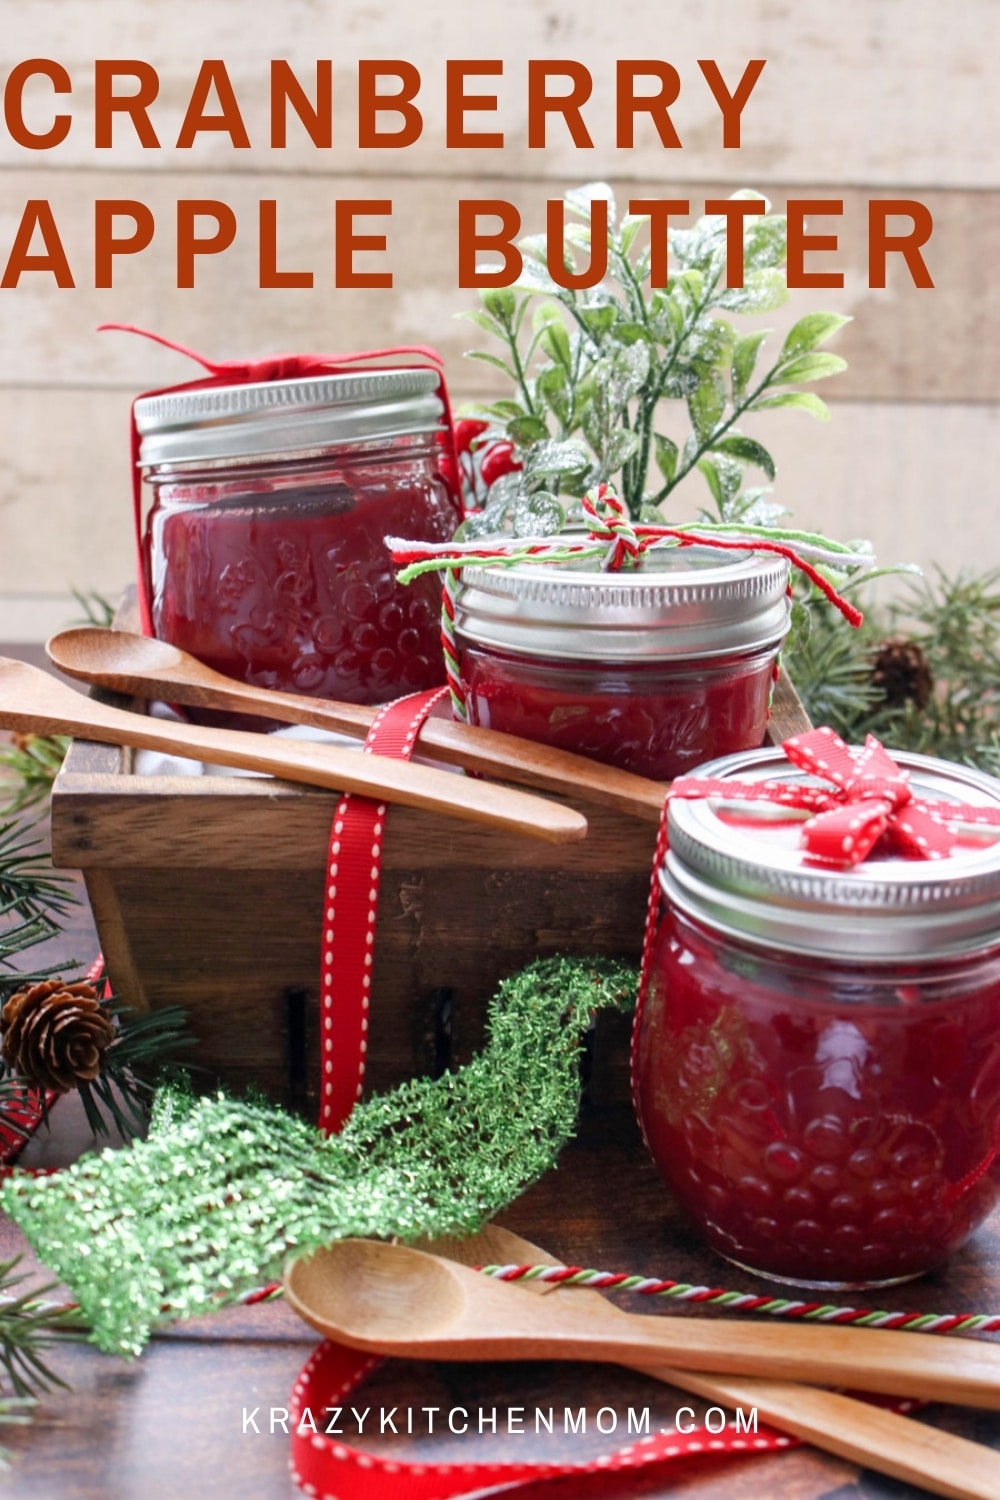 A simple and seasonal recipe to ring in the holidays all month. Cranberry apple butter is a sweet, creamy, tangy addition to your morning toast. via @krazykitchenmom